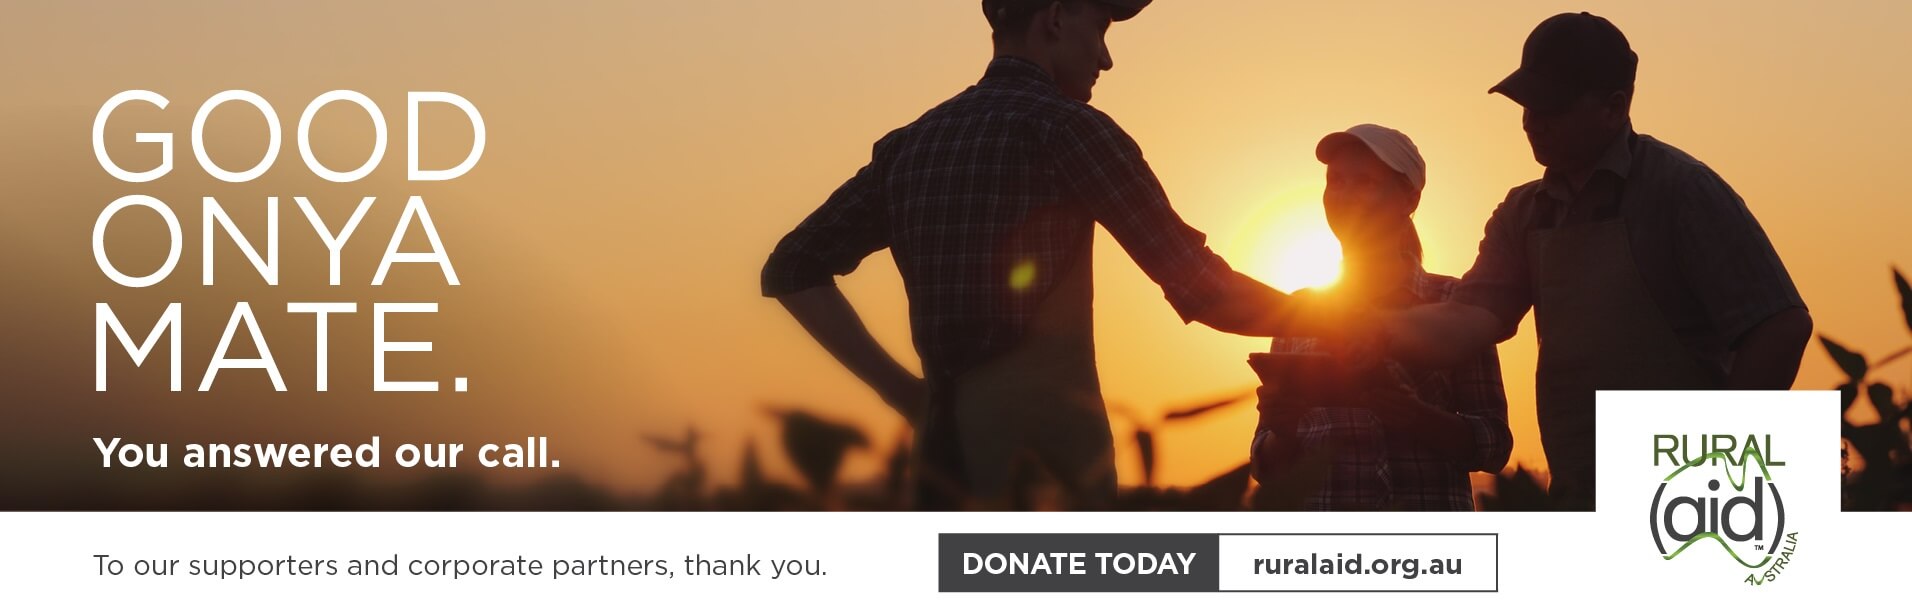 Good on ya Mate - Donate to Rural Aid, proudly supported by greengrub Wooden Toys Australia